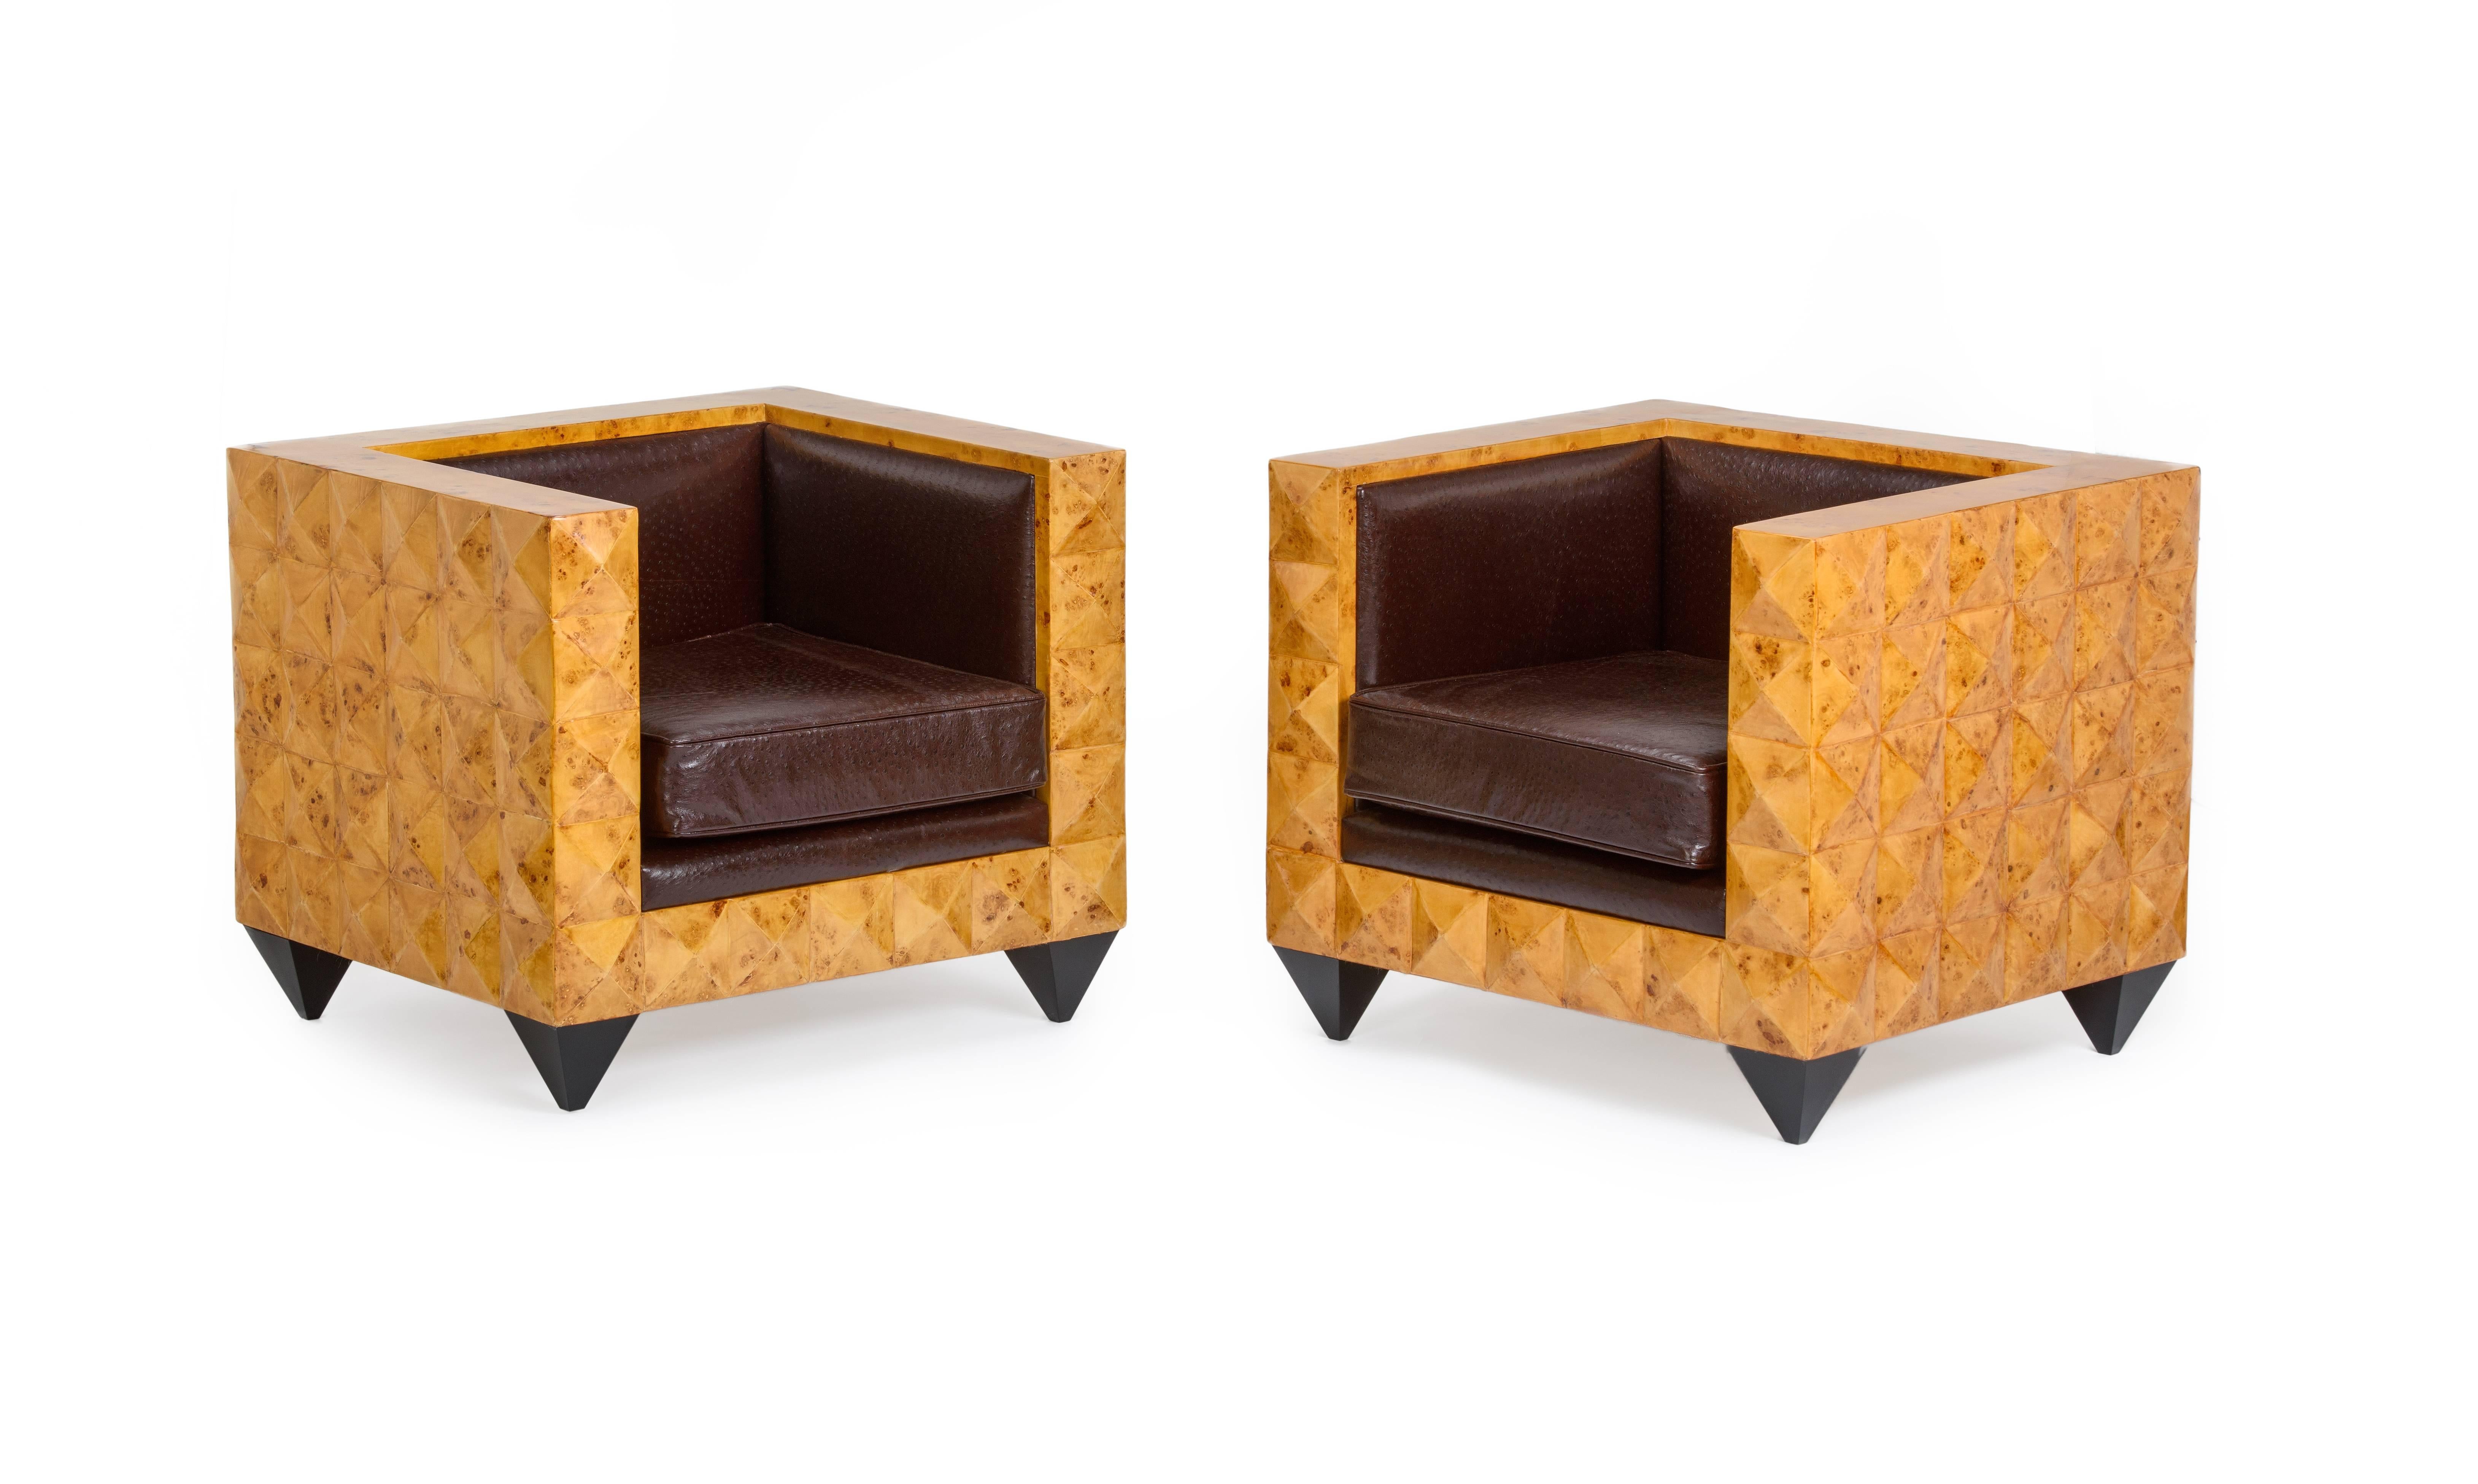 Gorgeous pair of buffed burr walnut pyramid armchairs in a most unusual shape, resting on black lacquered pyramid legs, reupholstered in a unique Cognac Ostrich printed leather, removable cushion cover with single piped detail.

Stunning center